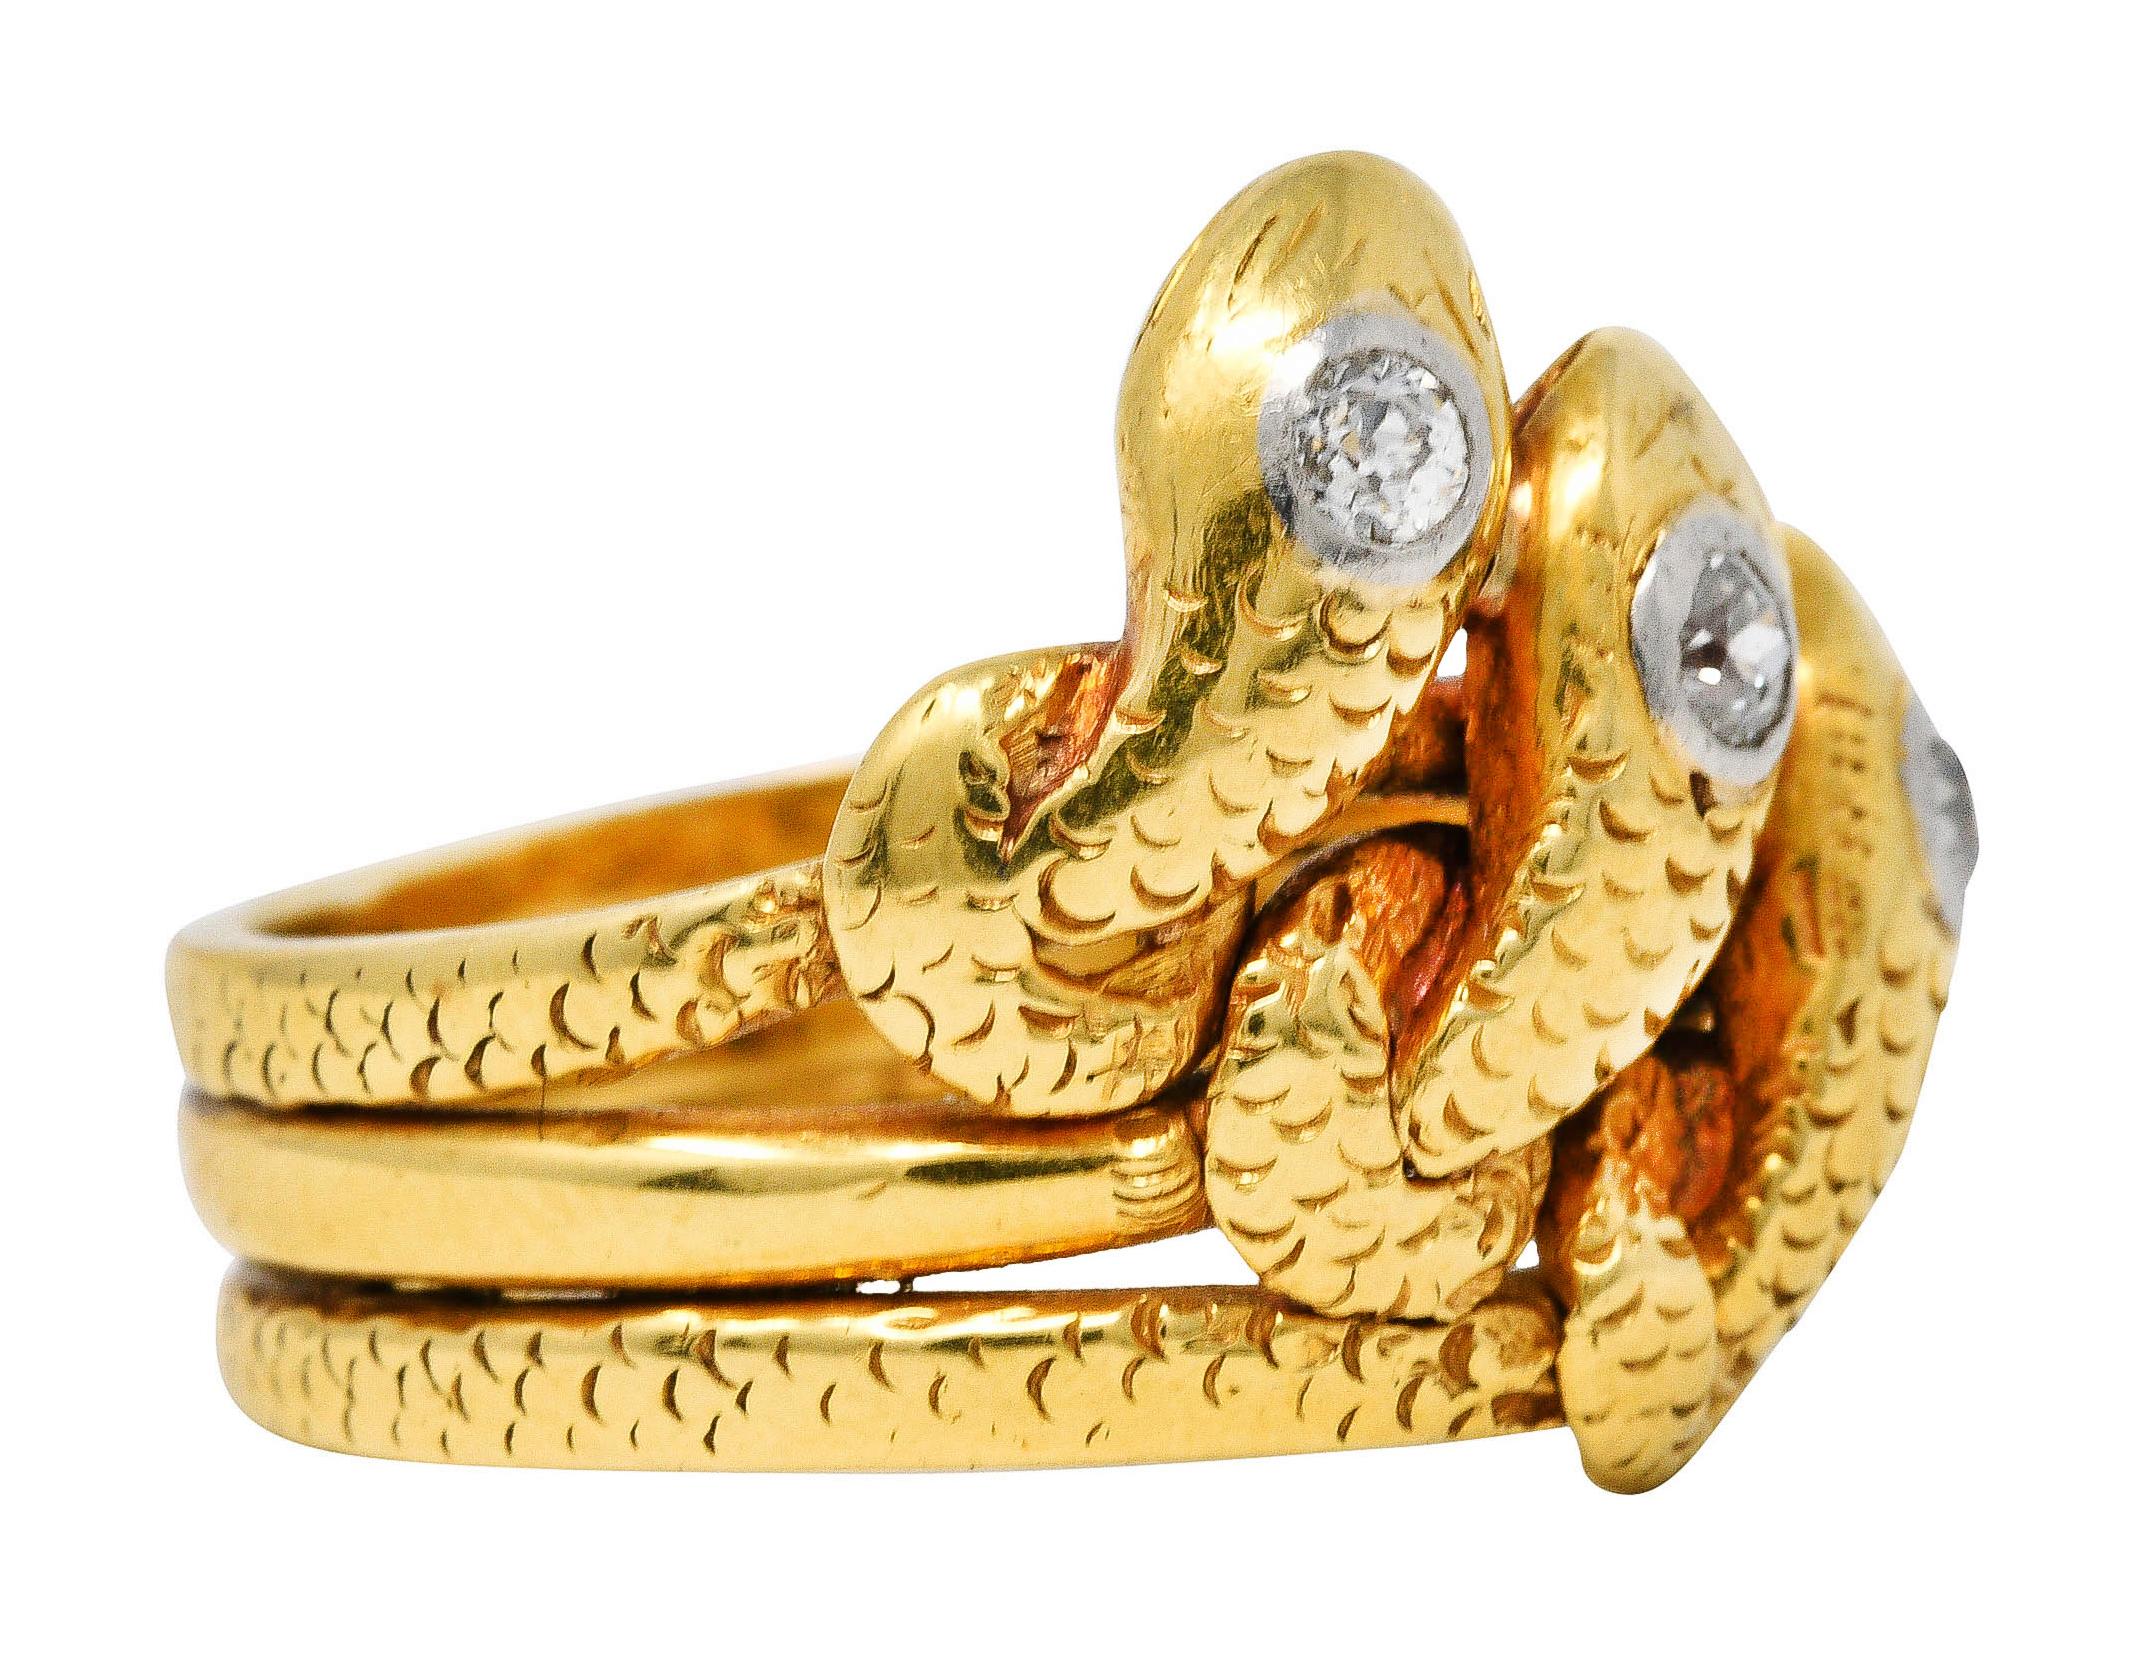 Ring is designed as three snakes as a triple band with knotted motifs

Each snake is textured by stylized scales and features an old European cut diamond

Bezel set in platinum while weighing in total approximately 0.40 carat - J/K color and SI